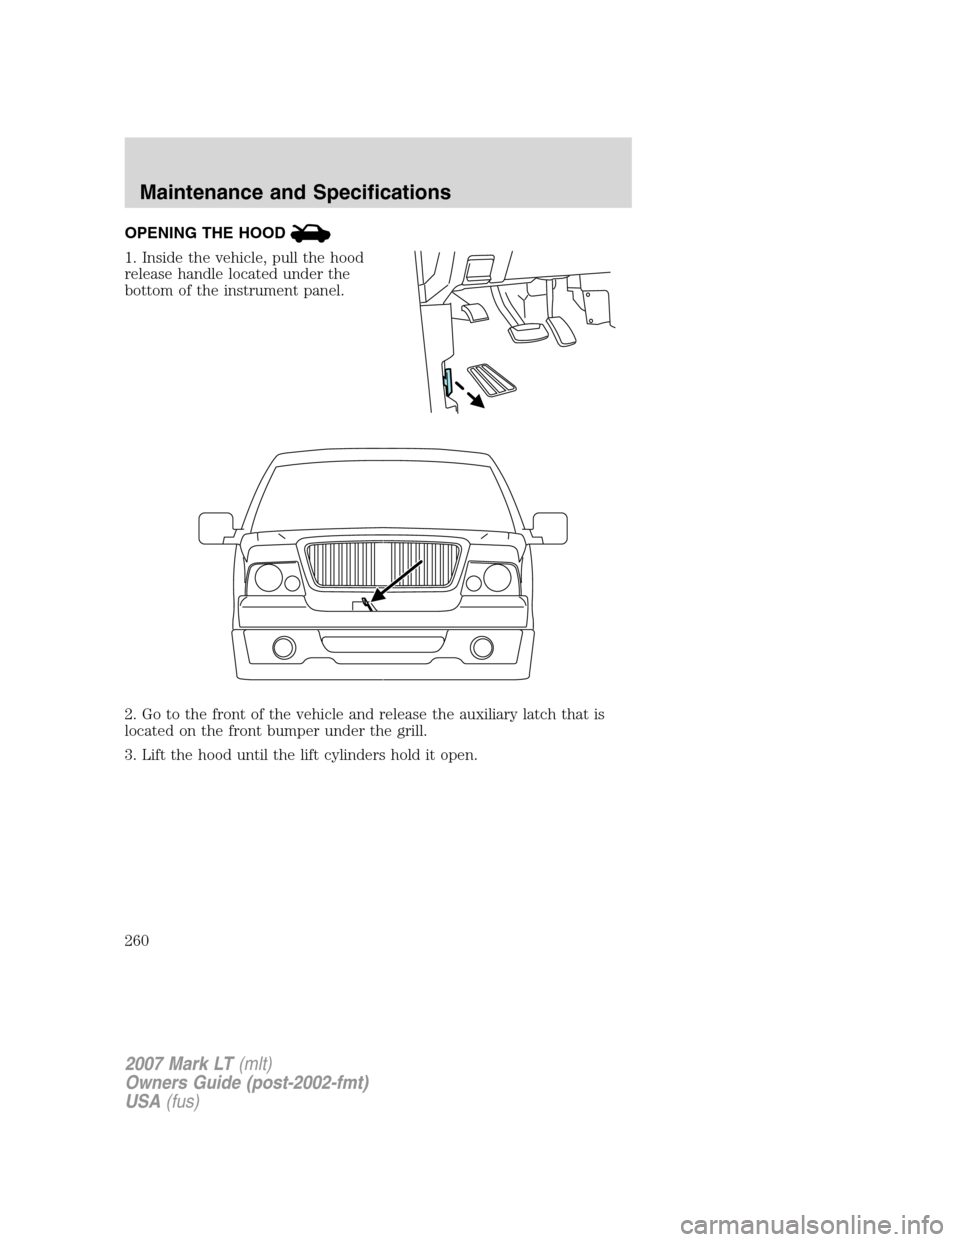 LINCOLN MARK LT 2007  Owners Manual OPENING THE HOOD
1. Inside the vehicle, pull the hood
release handle located under the
bottom of the instrument panel.
2. Go to the front of the vehicle and release the auxiliary latch that is
located